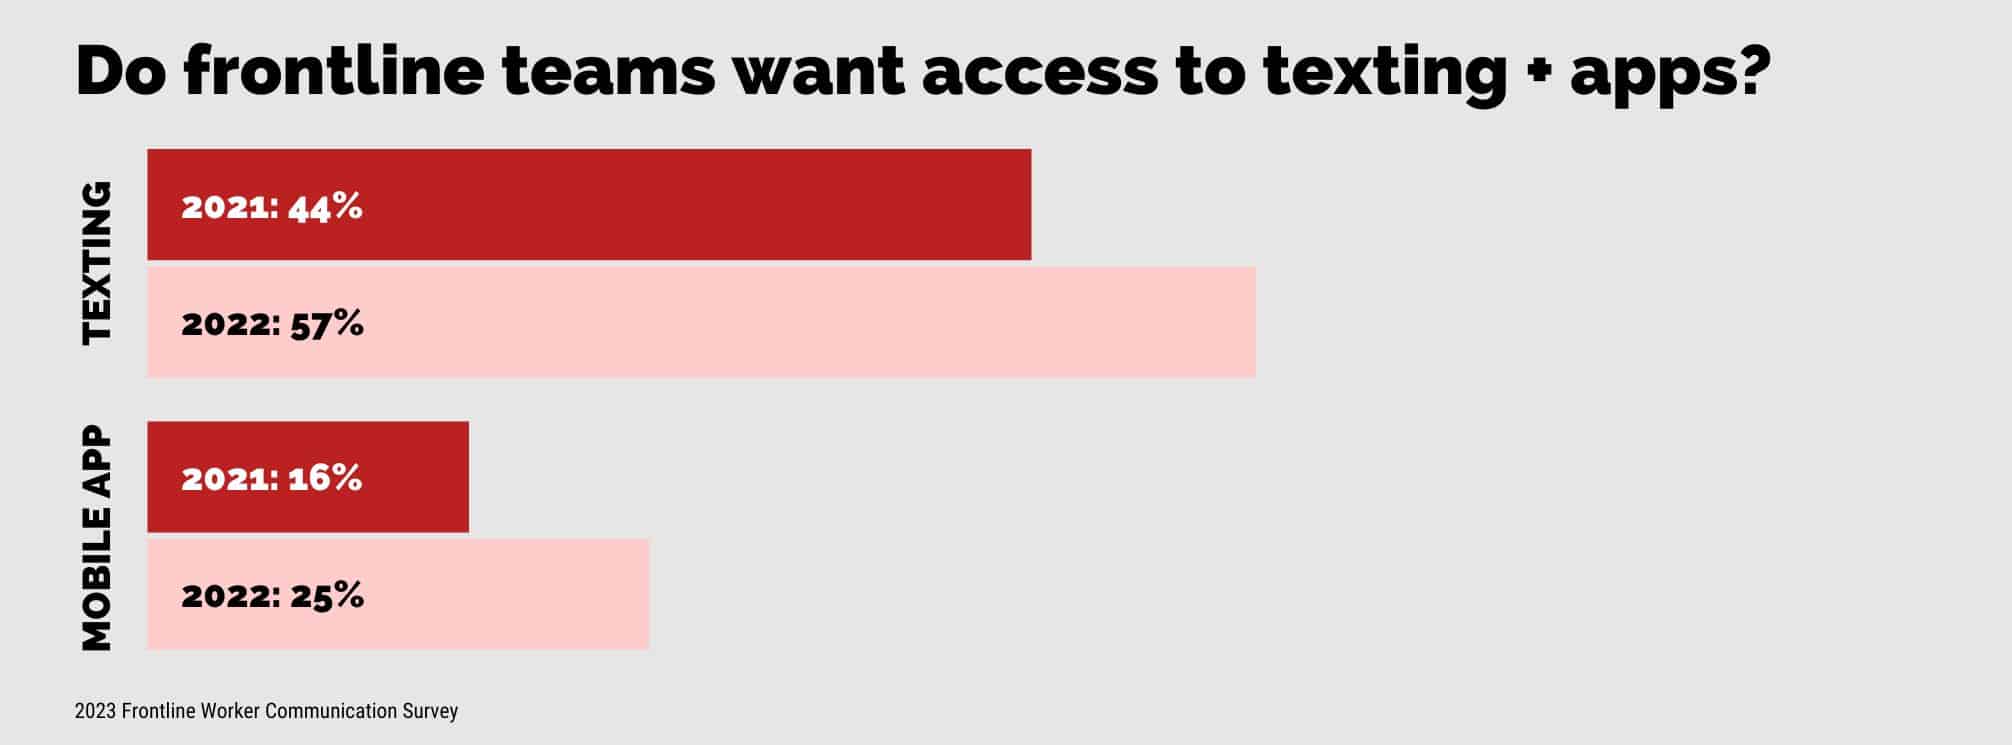 Chart titled "Do frontline teams want access to texting and apps?" Showing an increase from 2021 to 2022 for both channels.